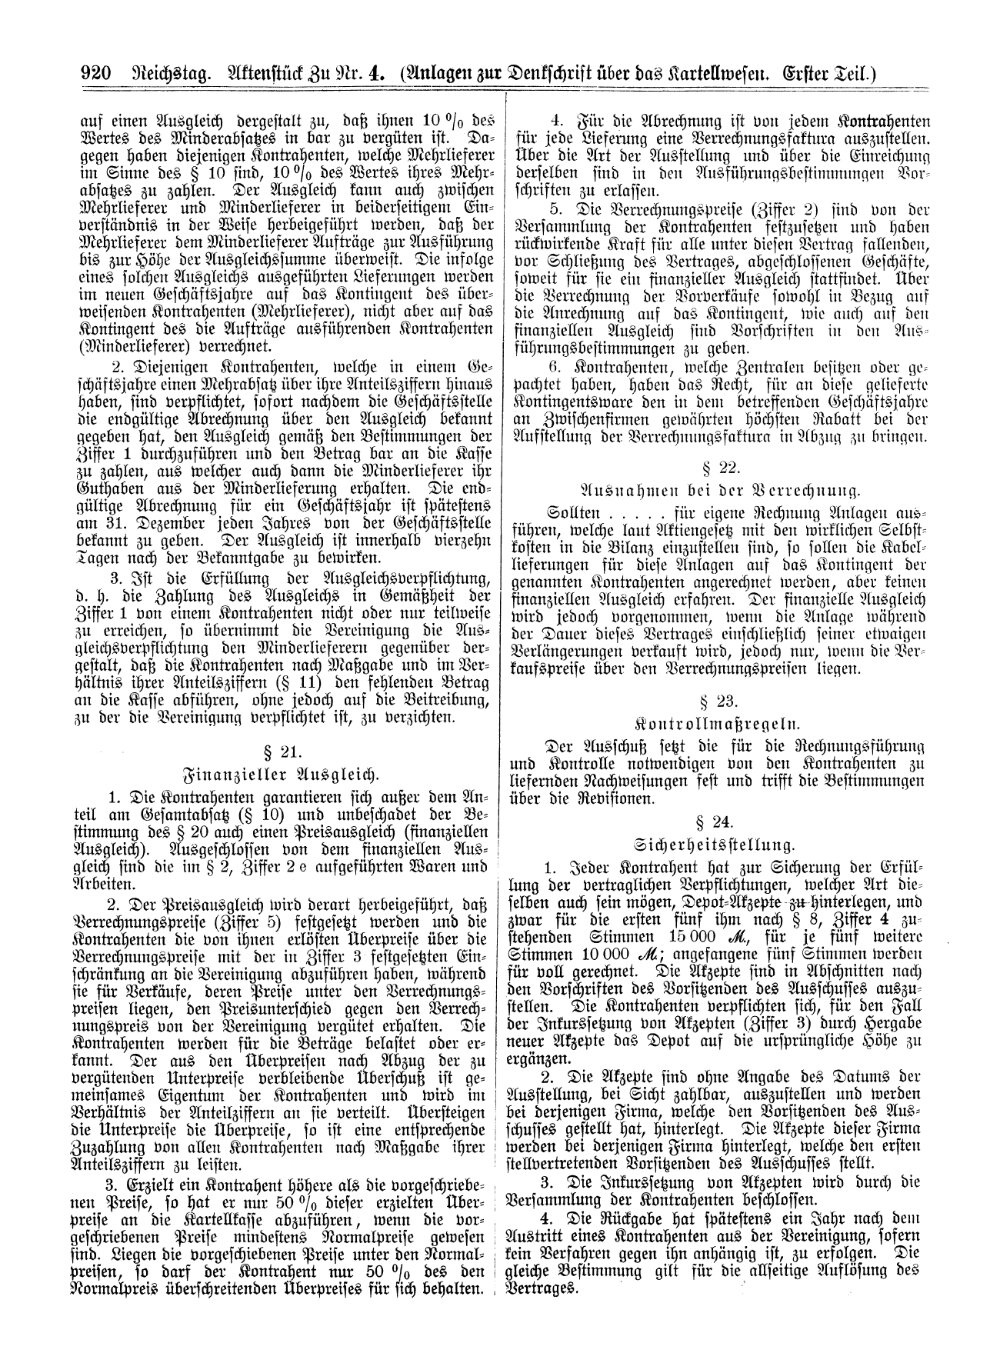 Scan of page 920